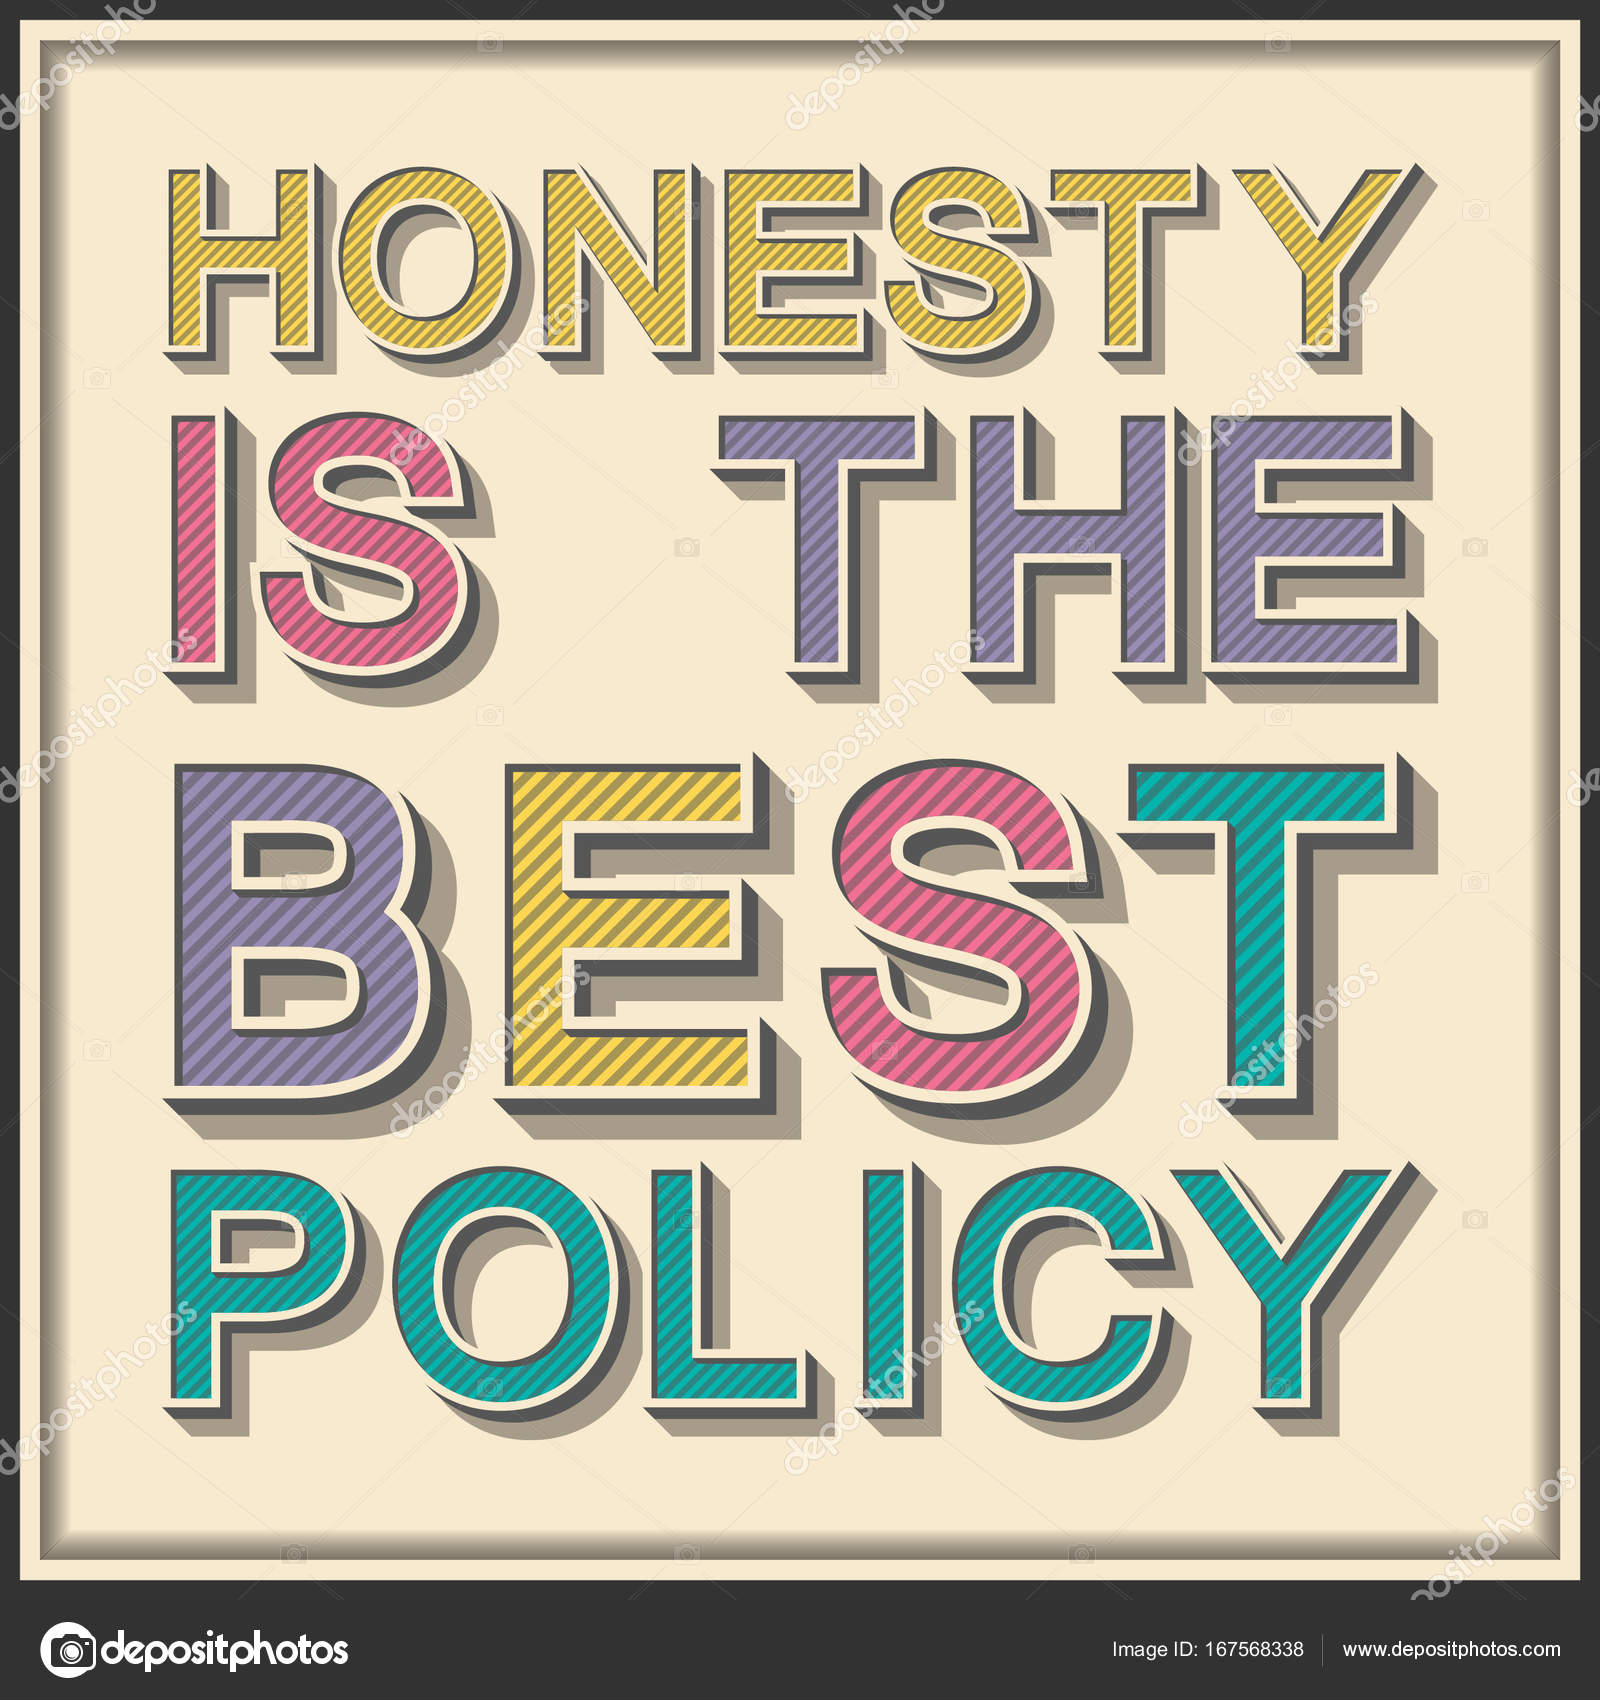 Honesty Is The Best Policy Inspirational Motivational Quote